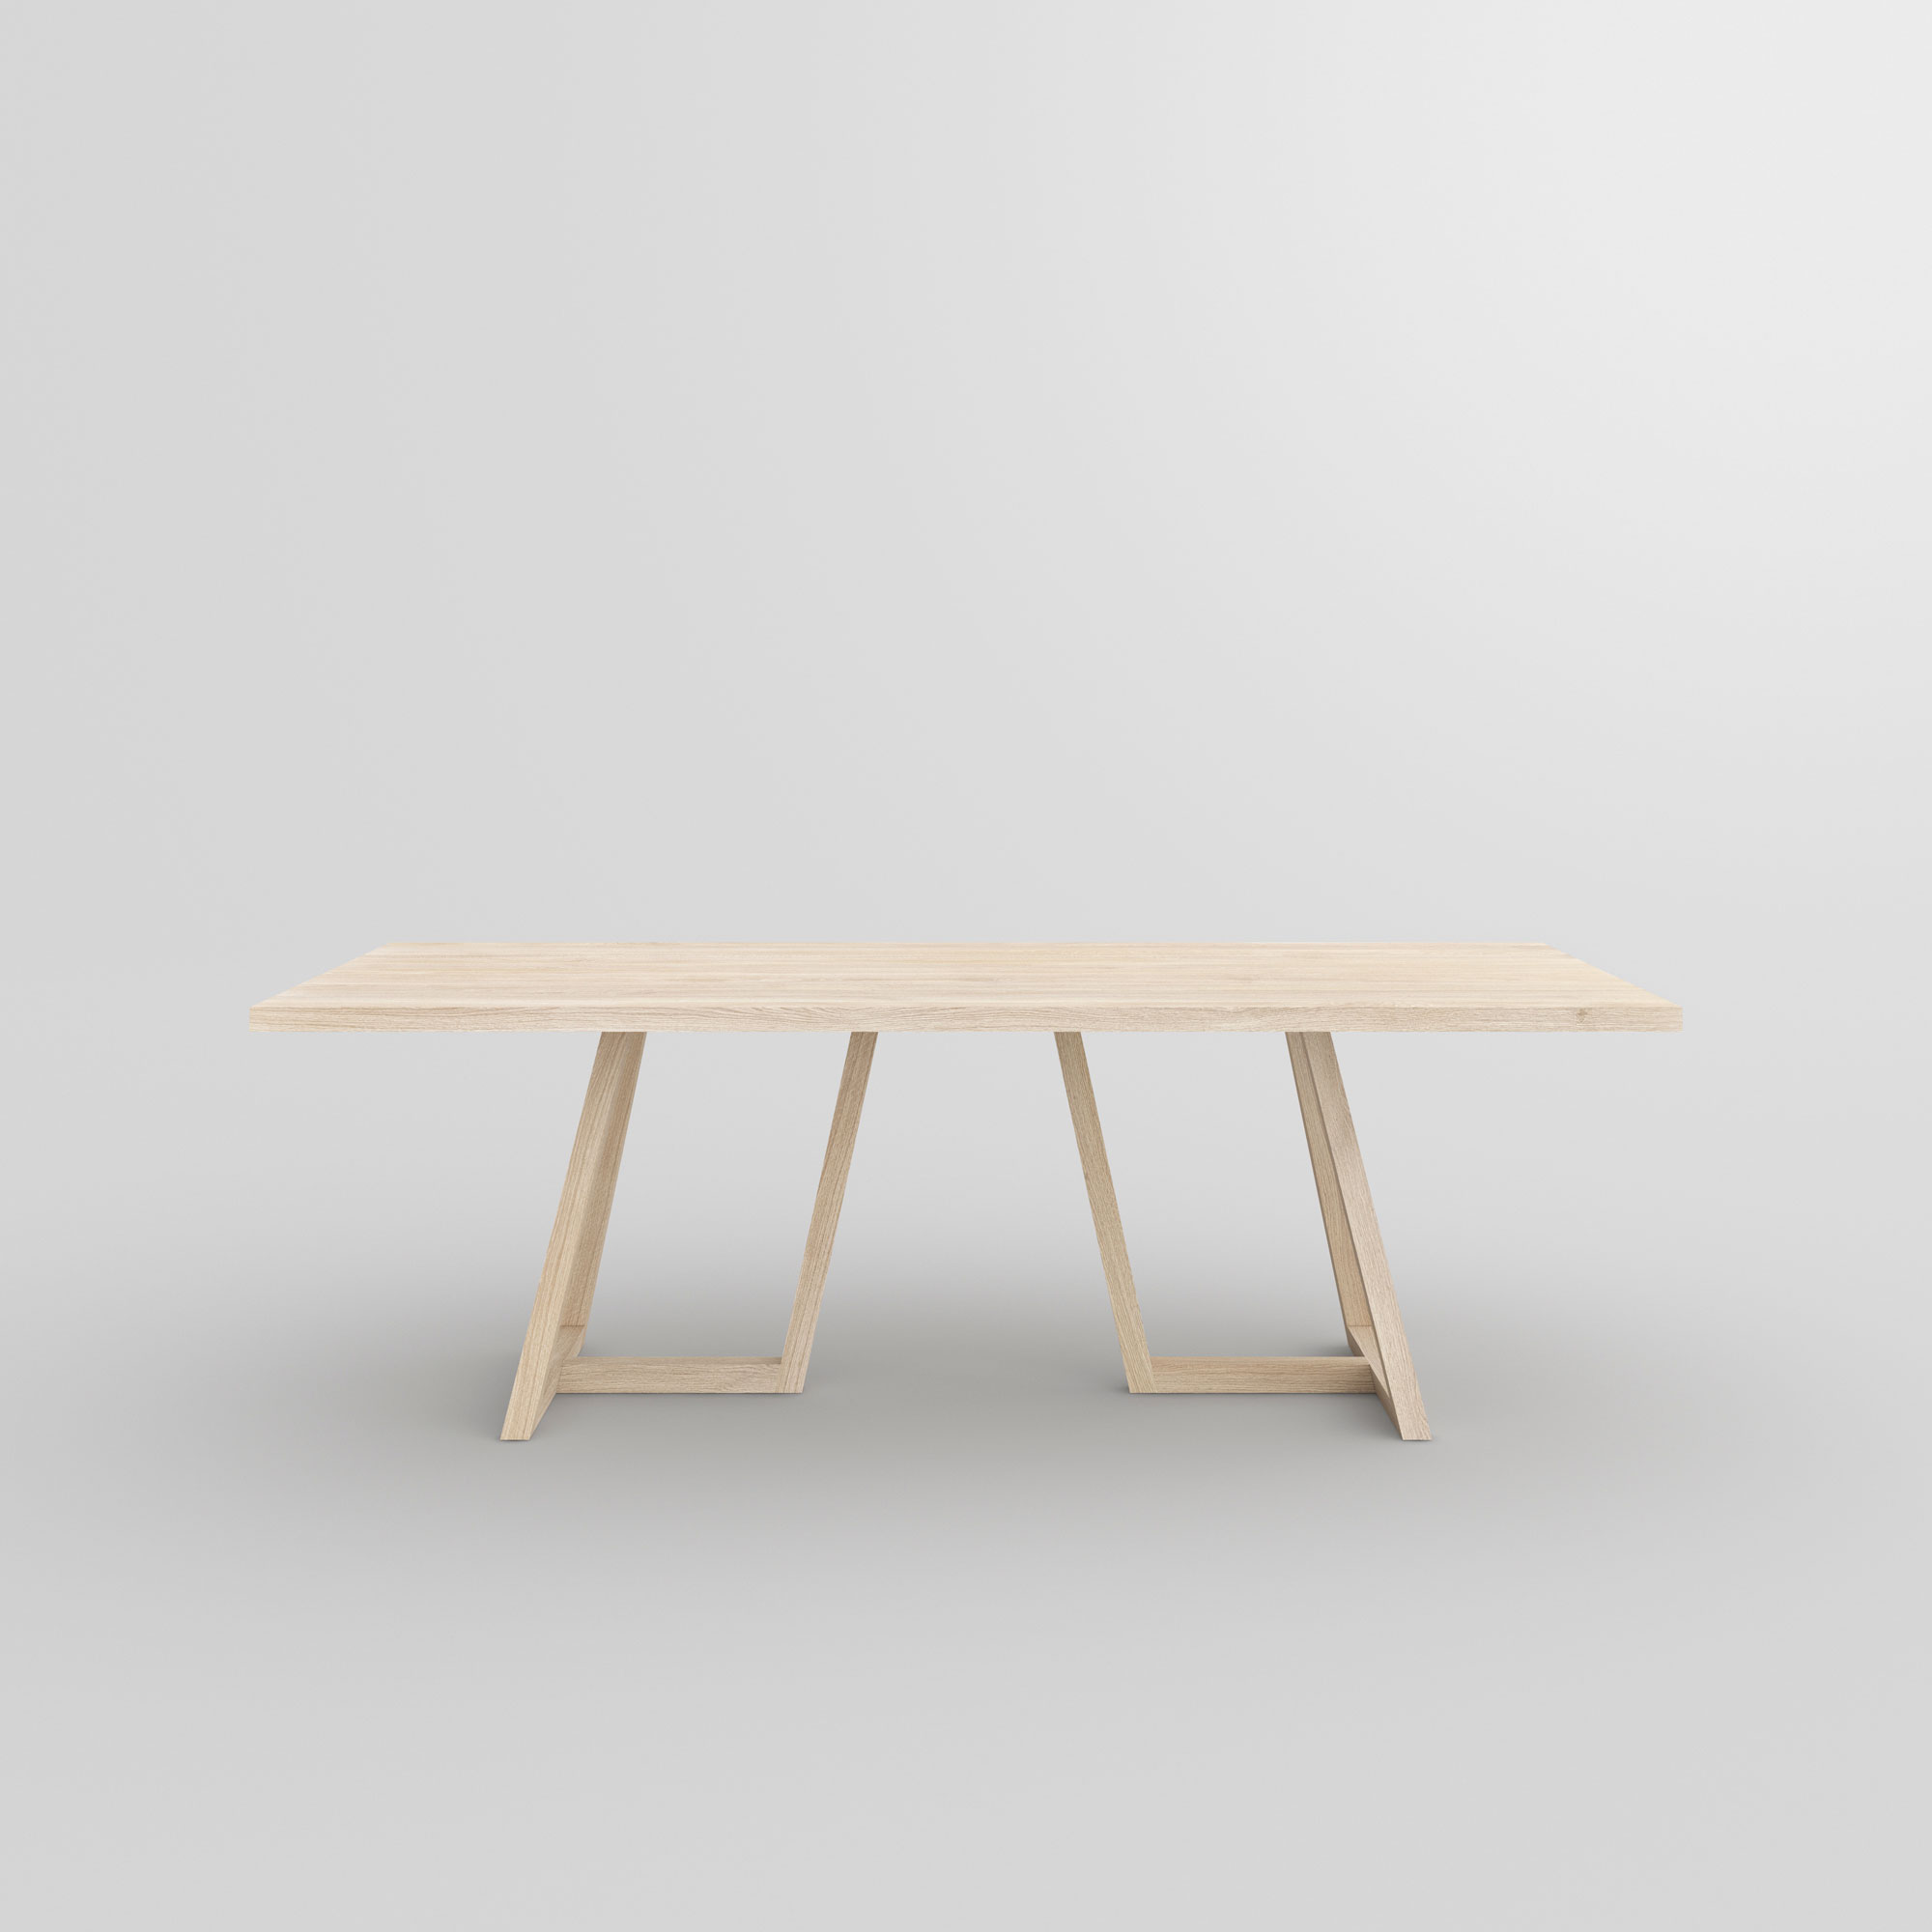 Designer Solid Wood Table MARGO cam2 custom made in solid wood by vitamin design